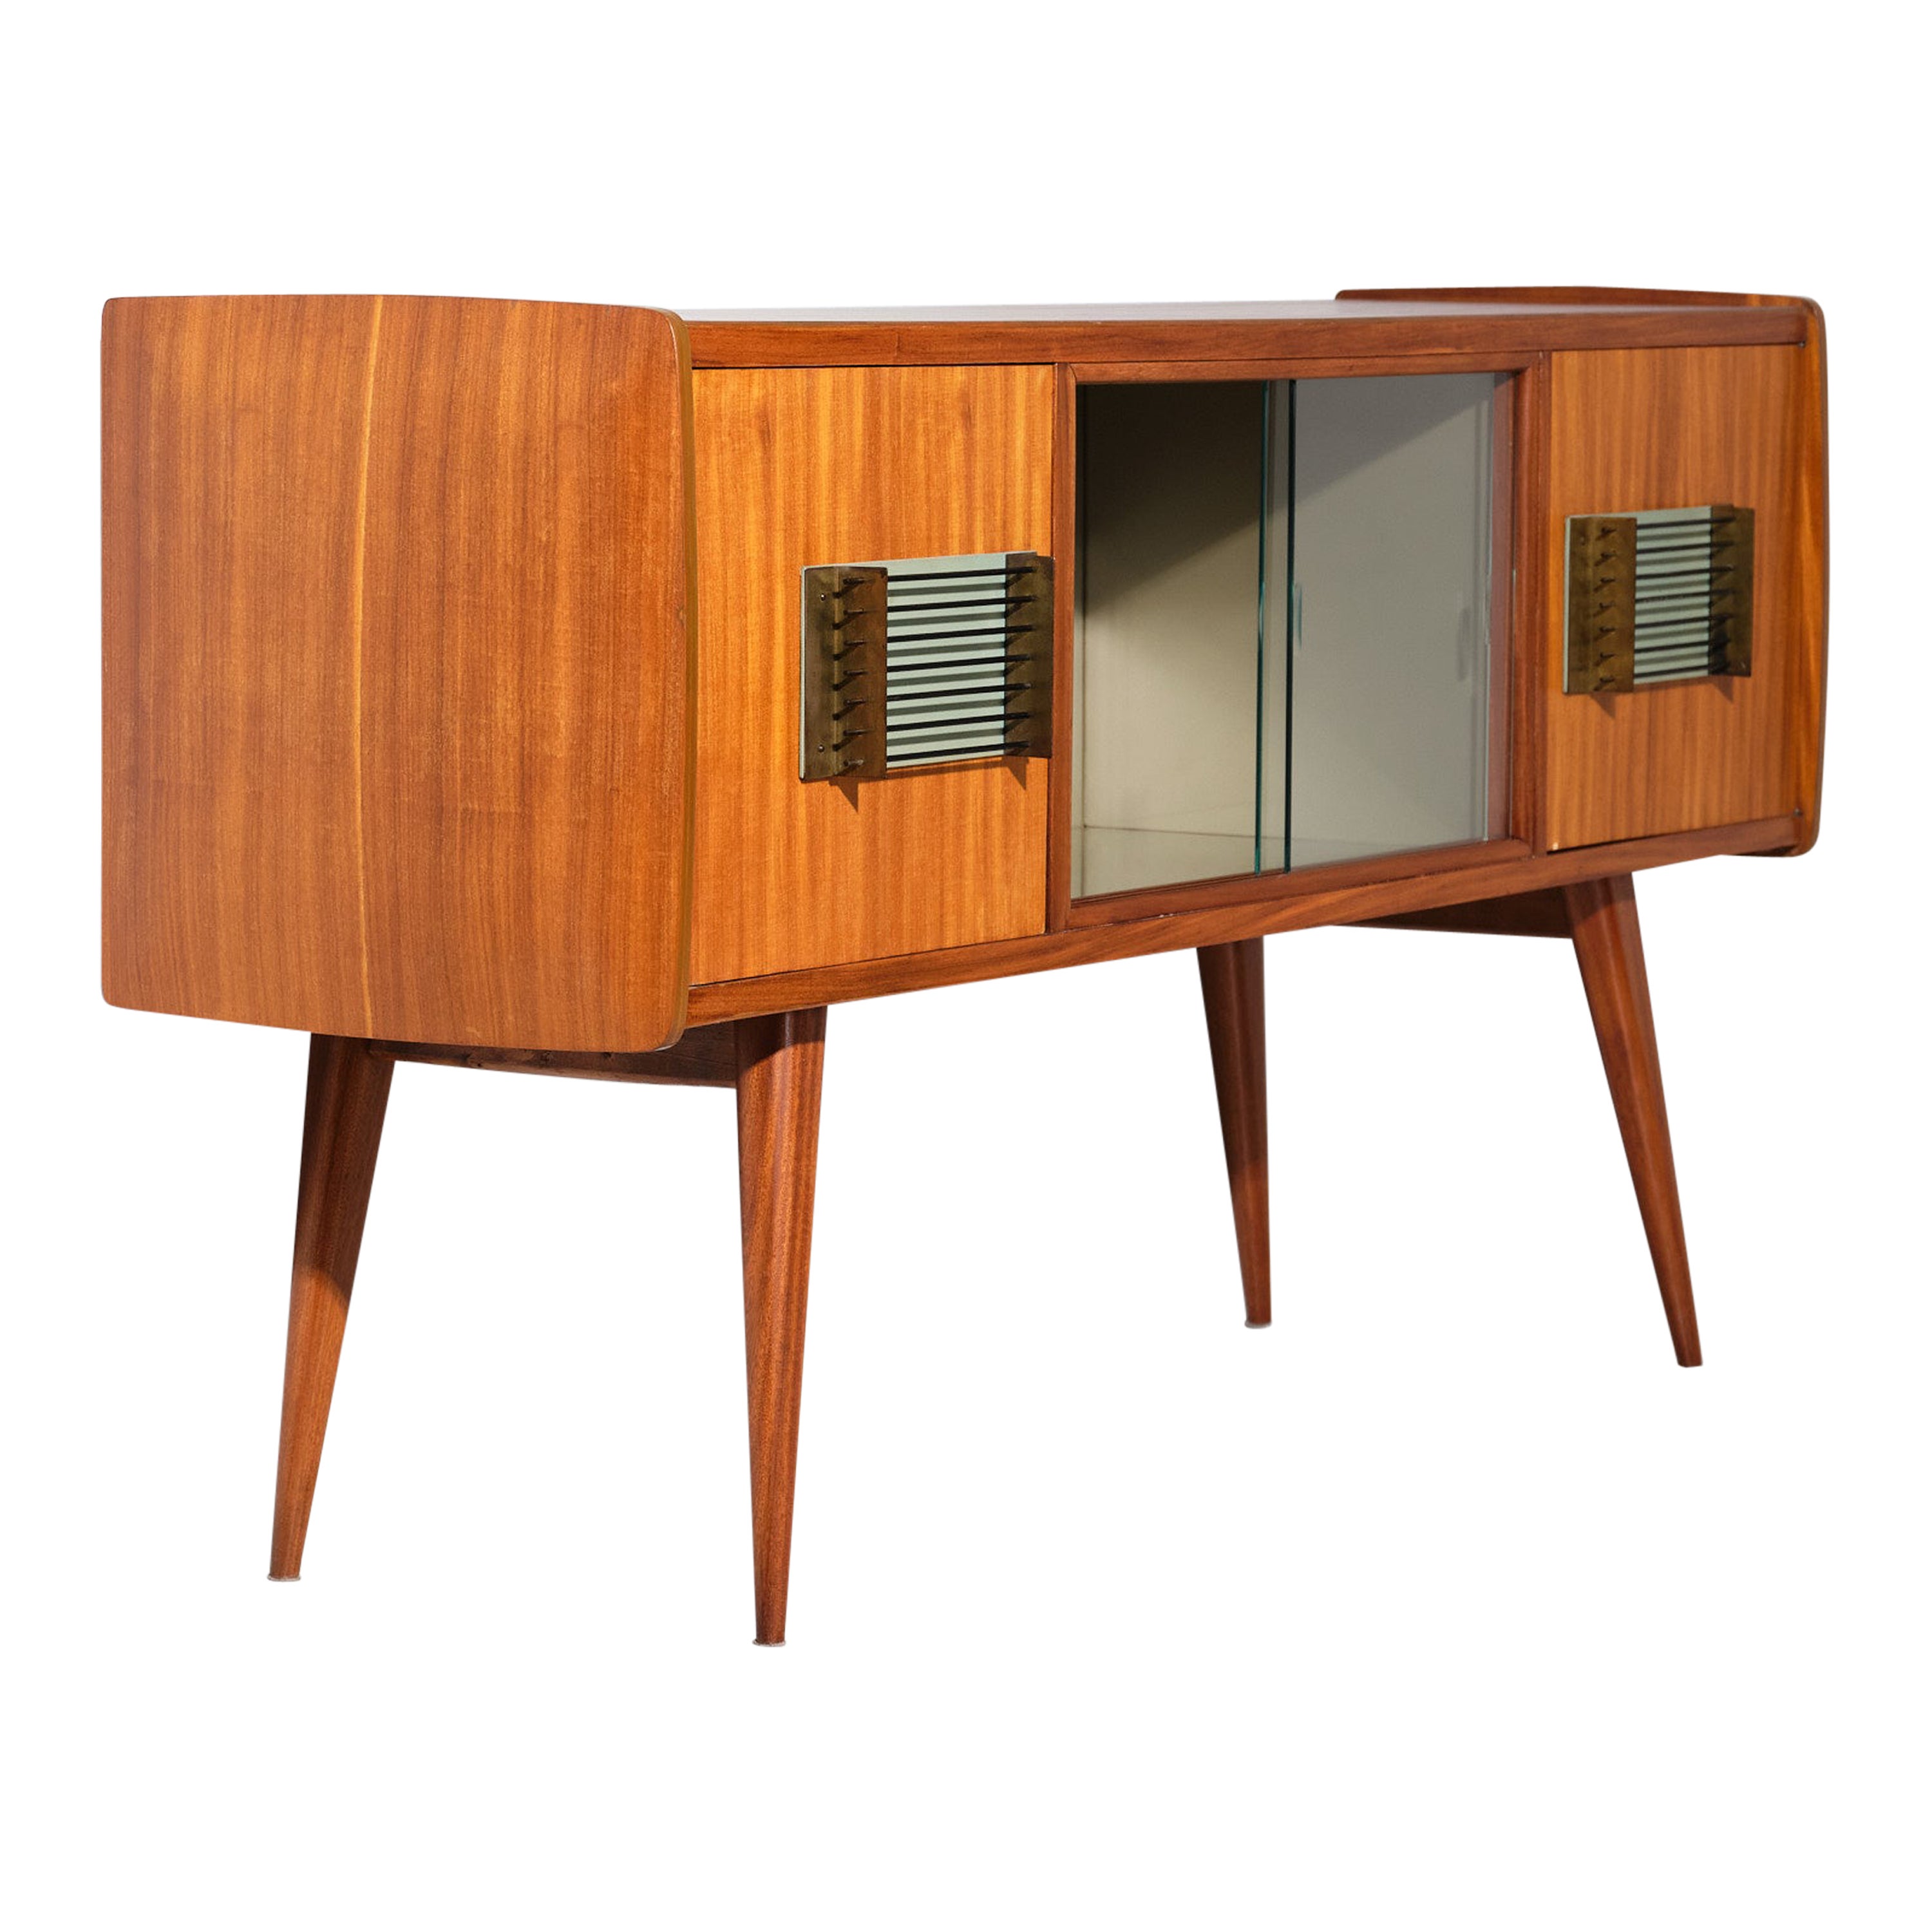 1950s Italian Teak Credenza with Bar : Refined Design, Glass Doors, and Brass